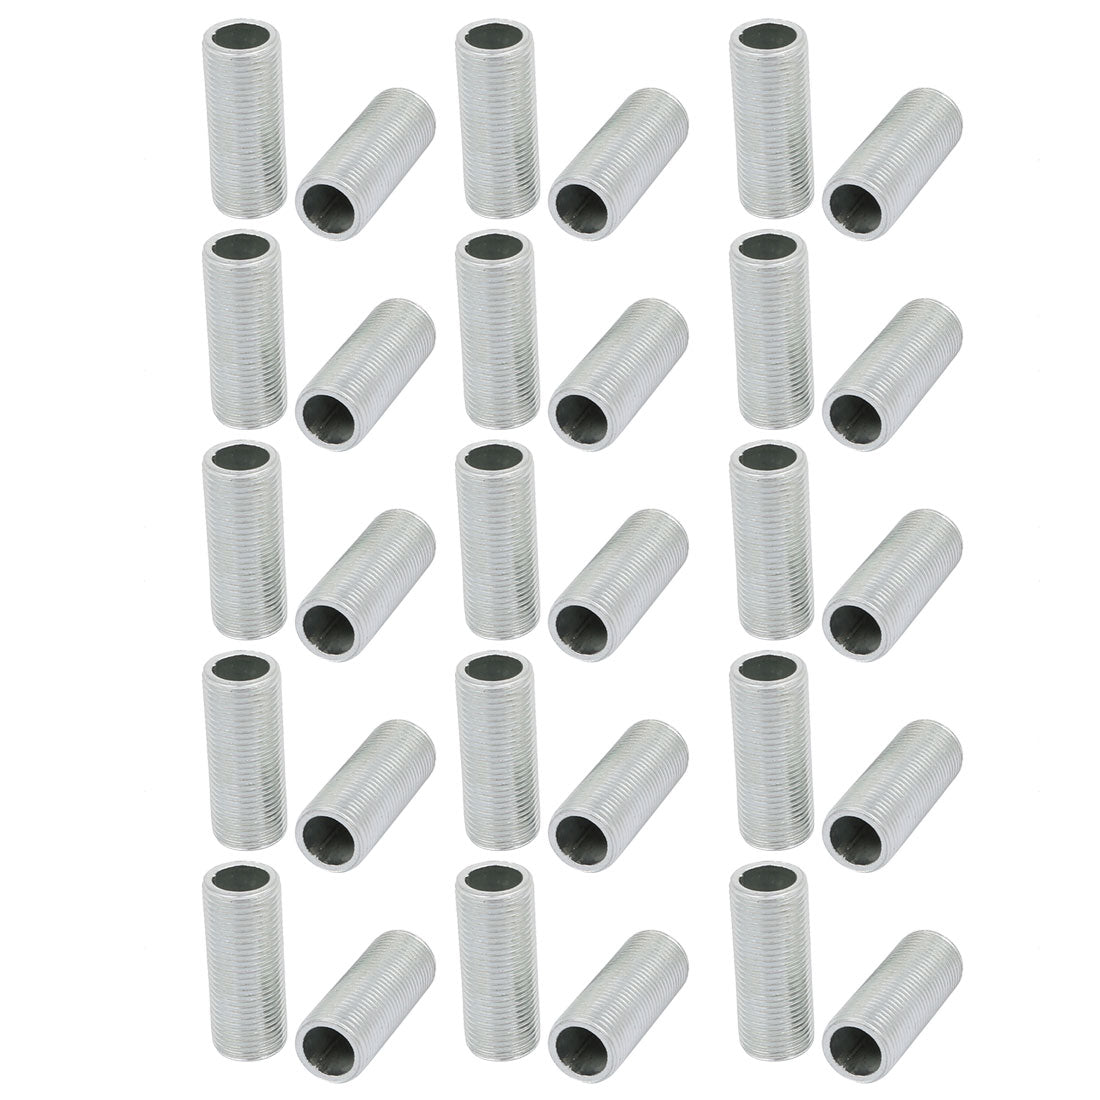 uxcell Uxcell 30 Pcs Metric M12 1mm Pitch Thread Zinc Plated Pipe Nipple Lamp Parts 30mm Long